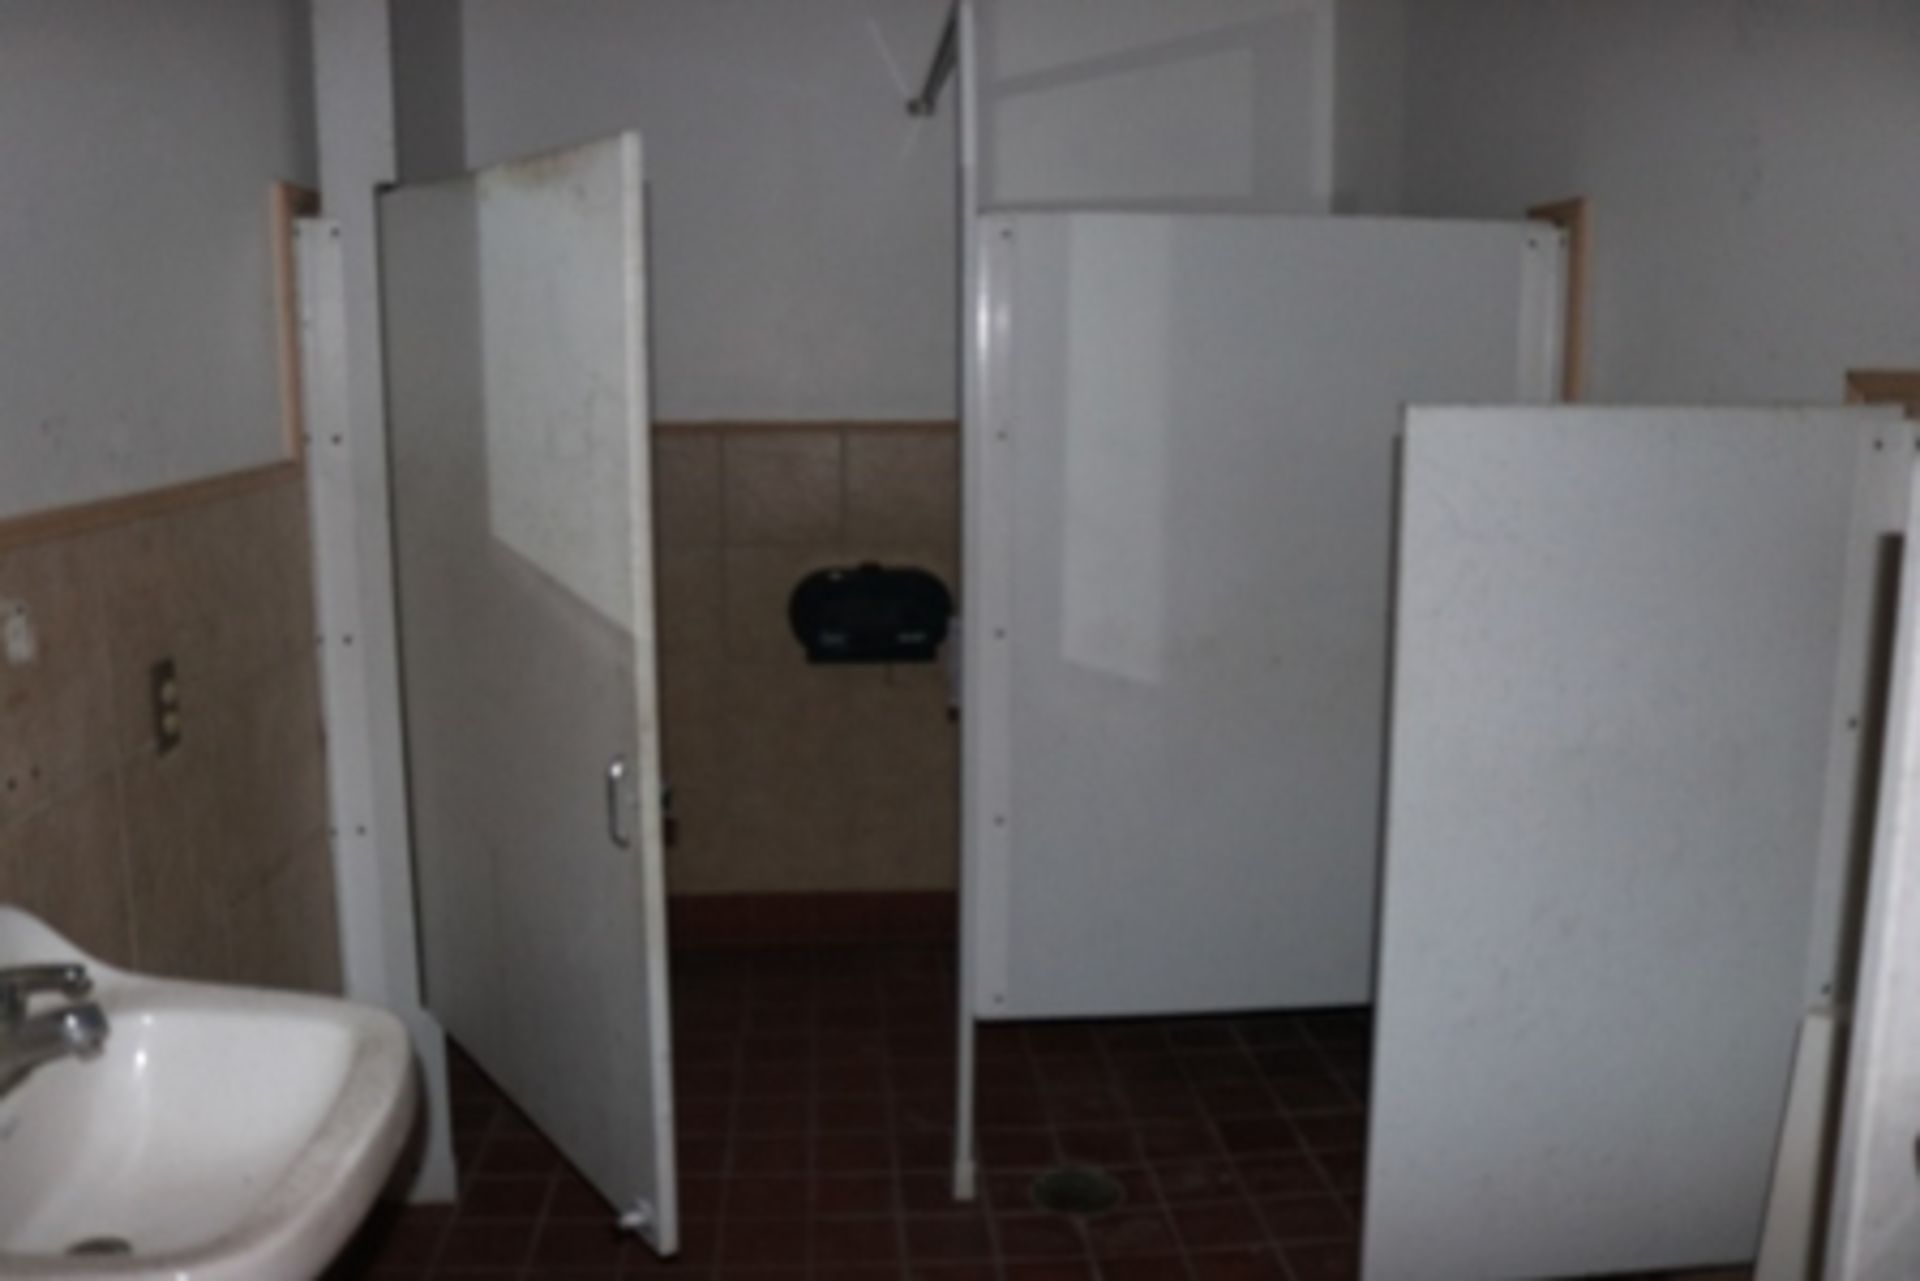 Mens and womens restrooms with 3 red steel doors (639) - Image 2 of 3